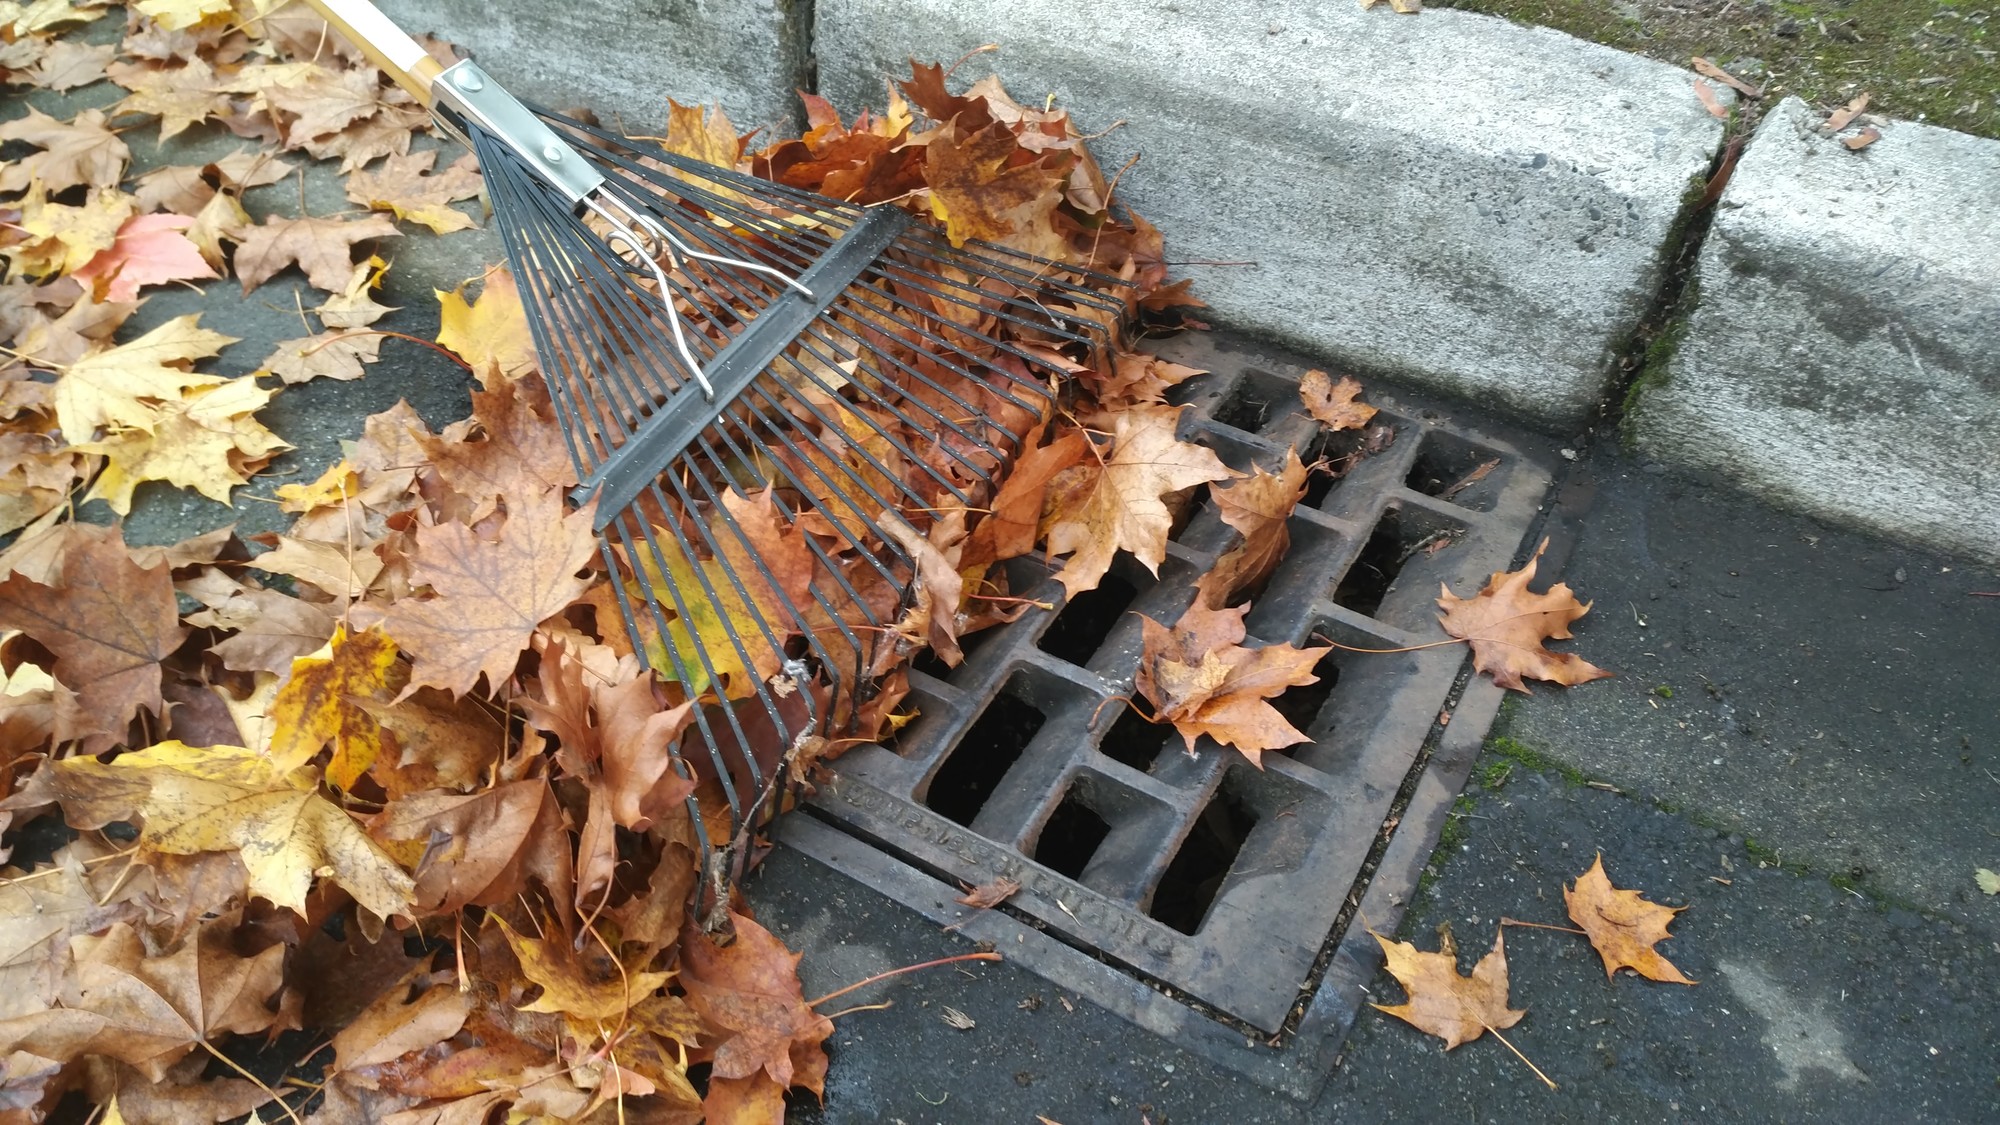 Storm water leaves in storm drain pic